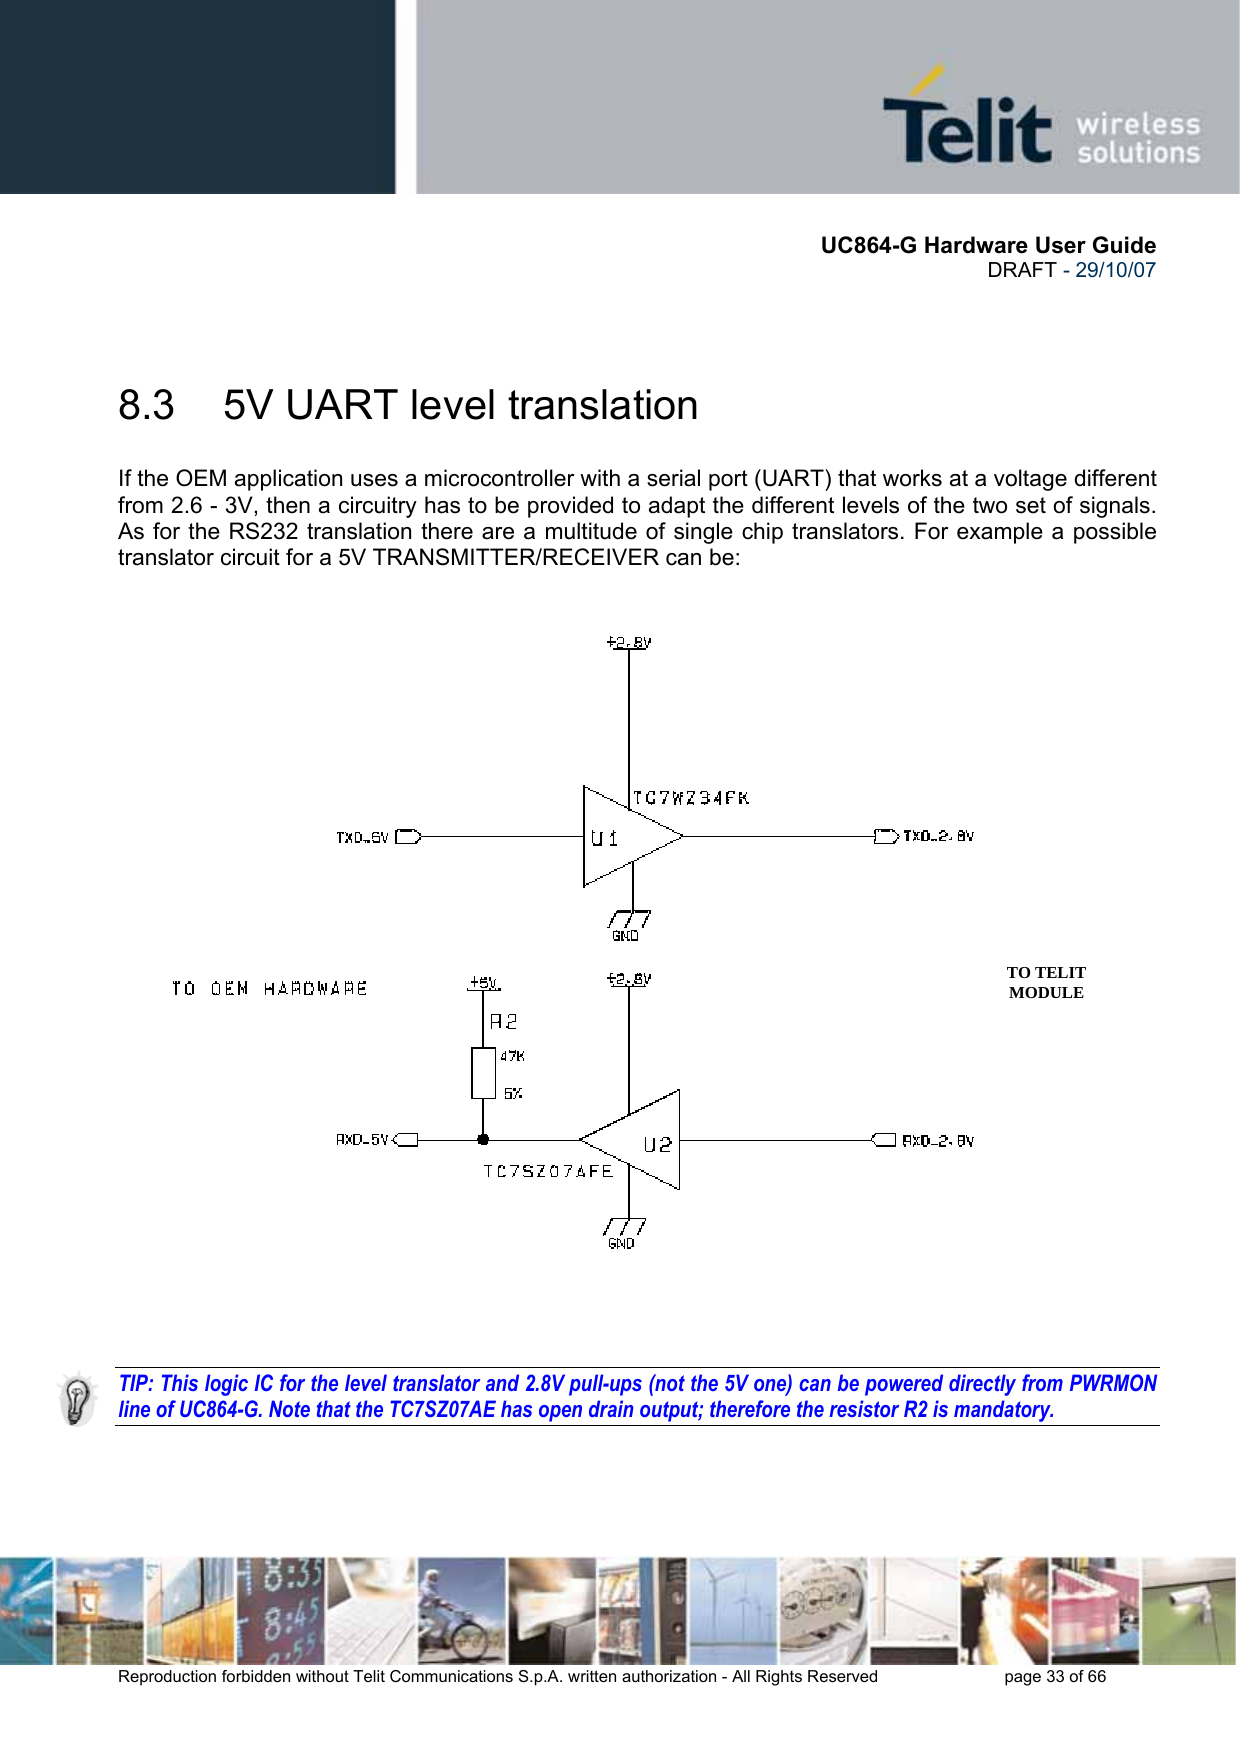       UC864-G Hardware User Guide  DRAFT - 29/10/07      Reproduction forbidden without Telit Communications S.p.A. written authorization - All Rights Reserved    page 33 of 66   8.3  5V UART level translation If the OEM application uses a microcontroller with a serial port (UART) that works at a voltage different from 2.6 - 3V, then a circuitry has to be provided to adapt the different levels of the two set of signals. As for the RS232 translation there are a multitude of single chip translators. For example a possible translator circuit for a 5V TRANSMITTER/RECEIVER can be:      TIP: This logic IC for the level translator and 2.8V pull-ups (not the 5V one) can be powered directly from PWRMON line of UC864-G. Note that the TC7SZ07AE has open drain output; therefore the resistor R2 is mandatory.  TO TELIT MODULE 